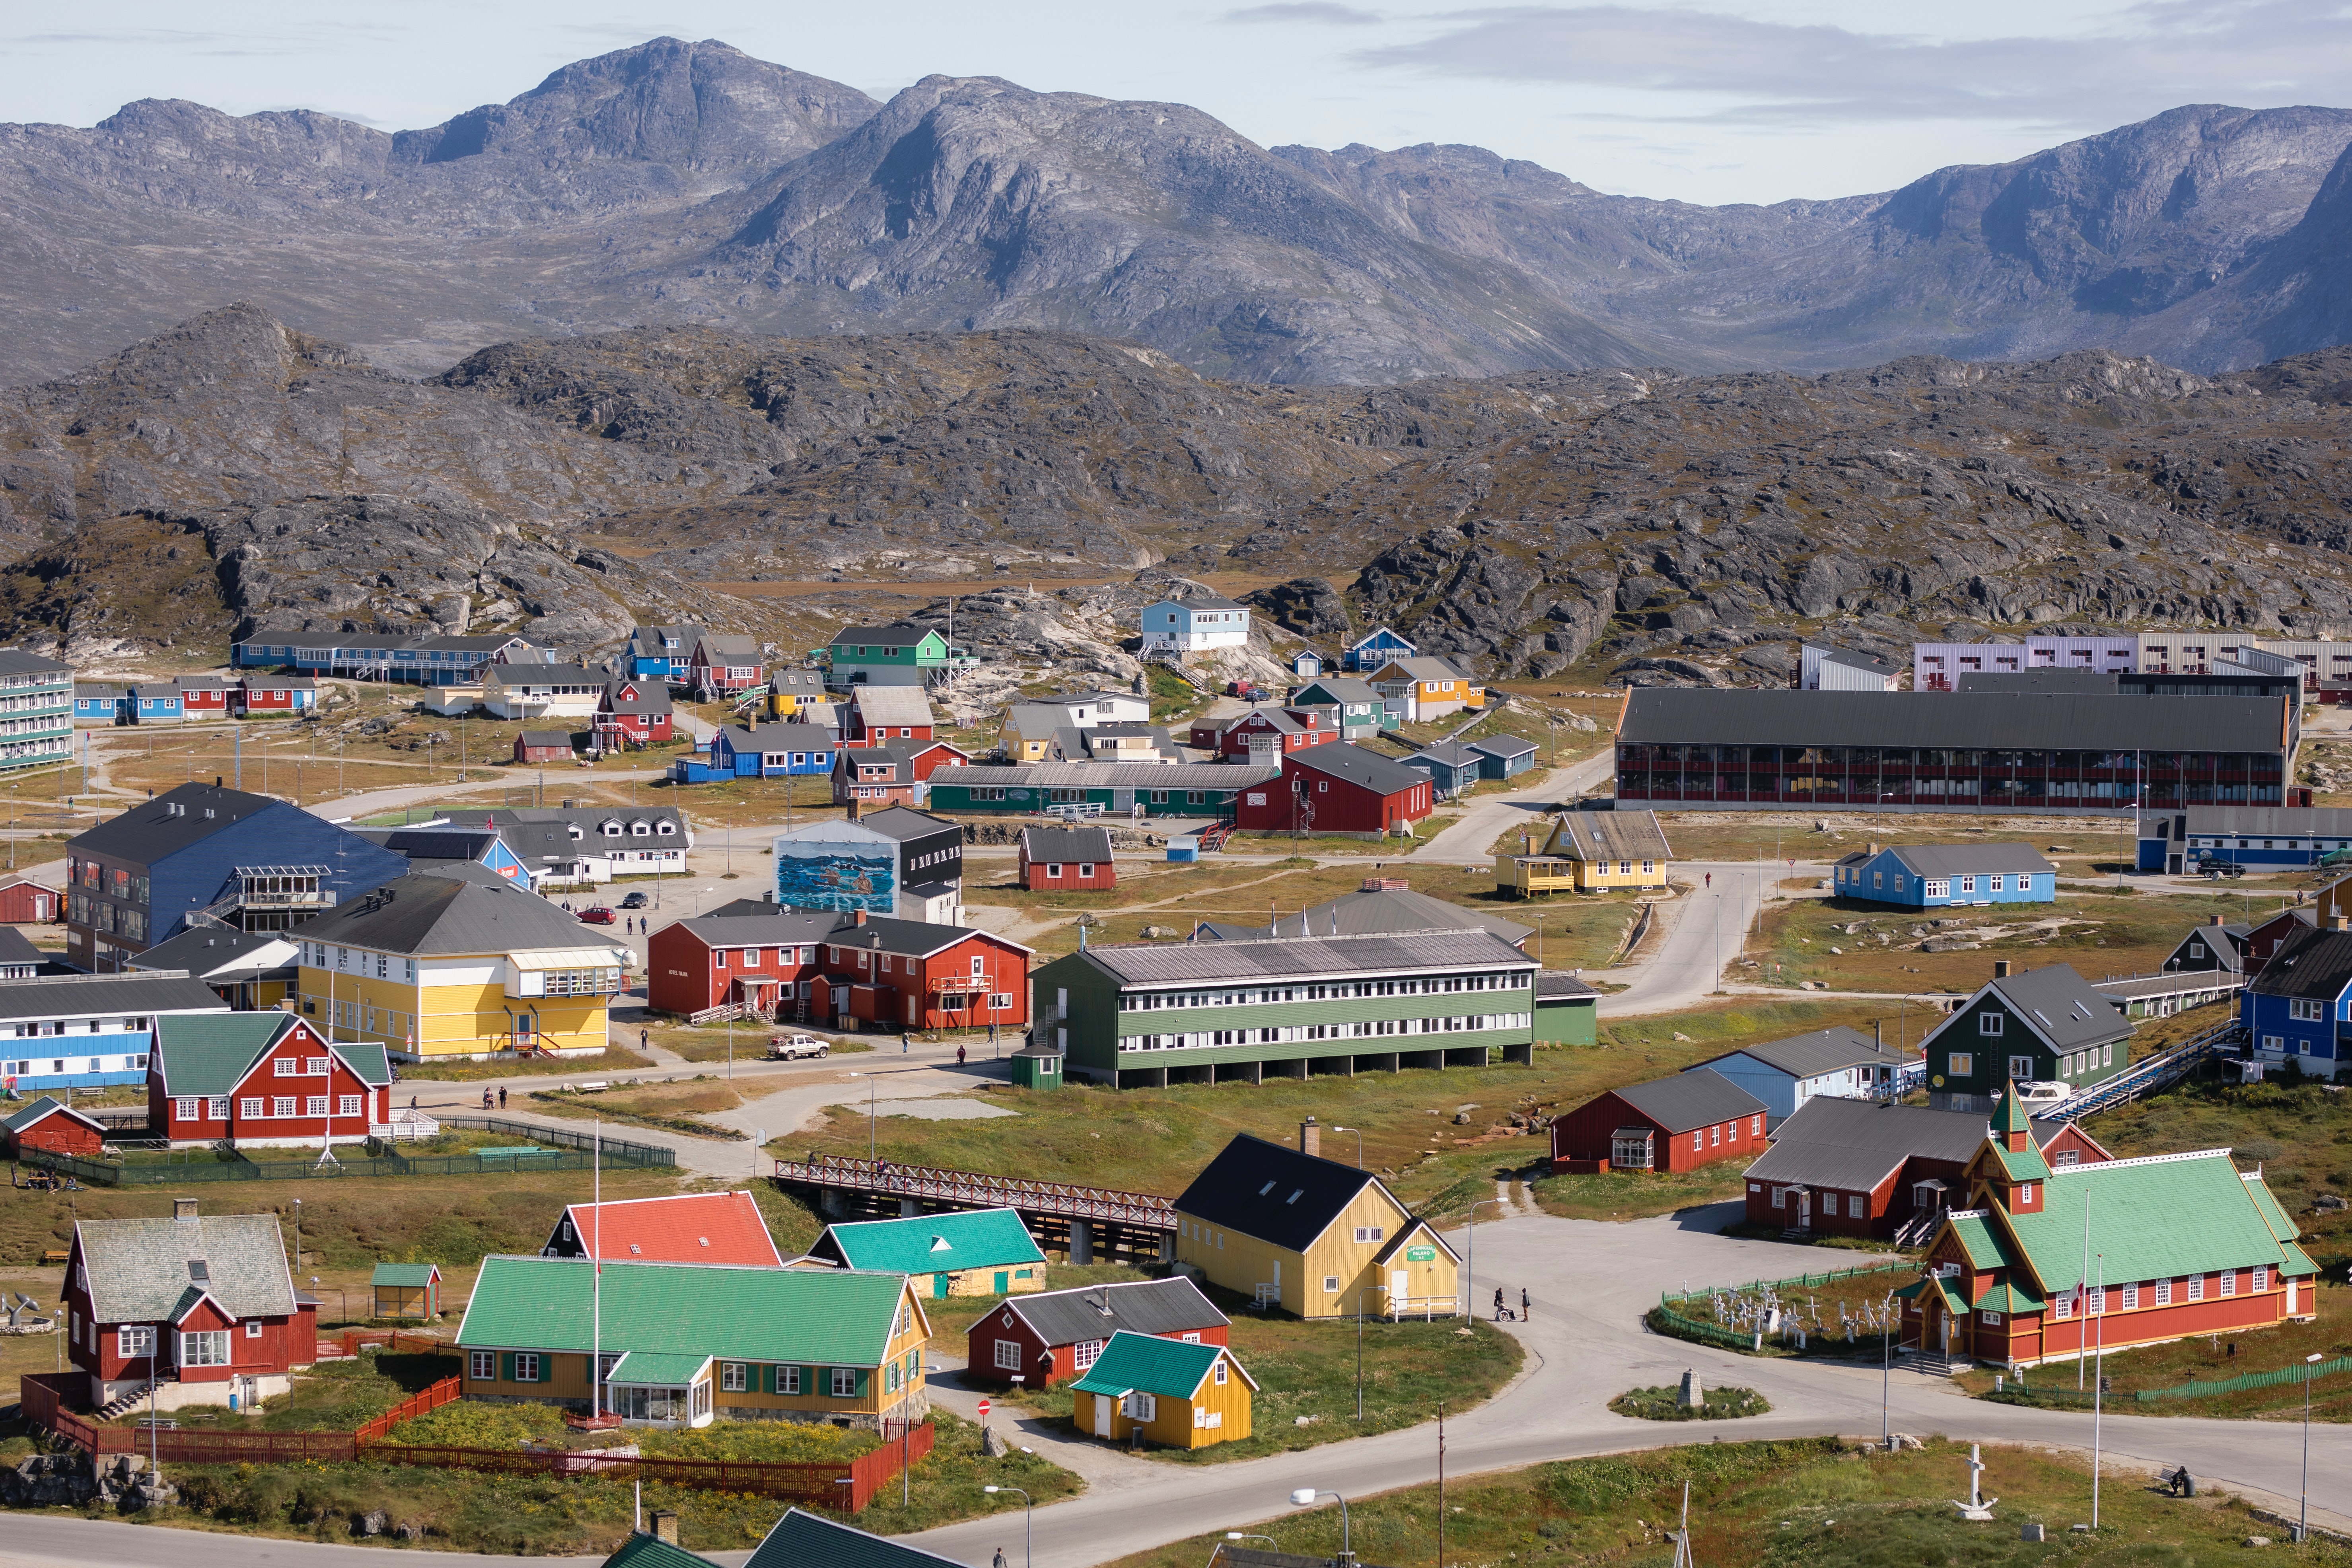 Sweeping picture of Nuuk, Greenland, woth mountains in background and coloured houses in foreground.